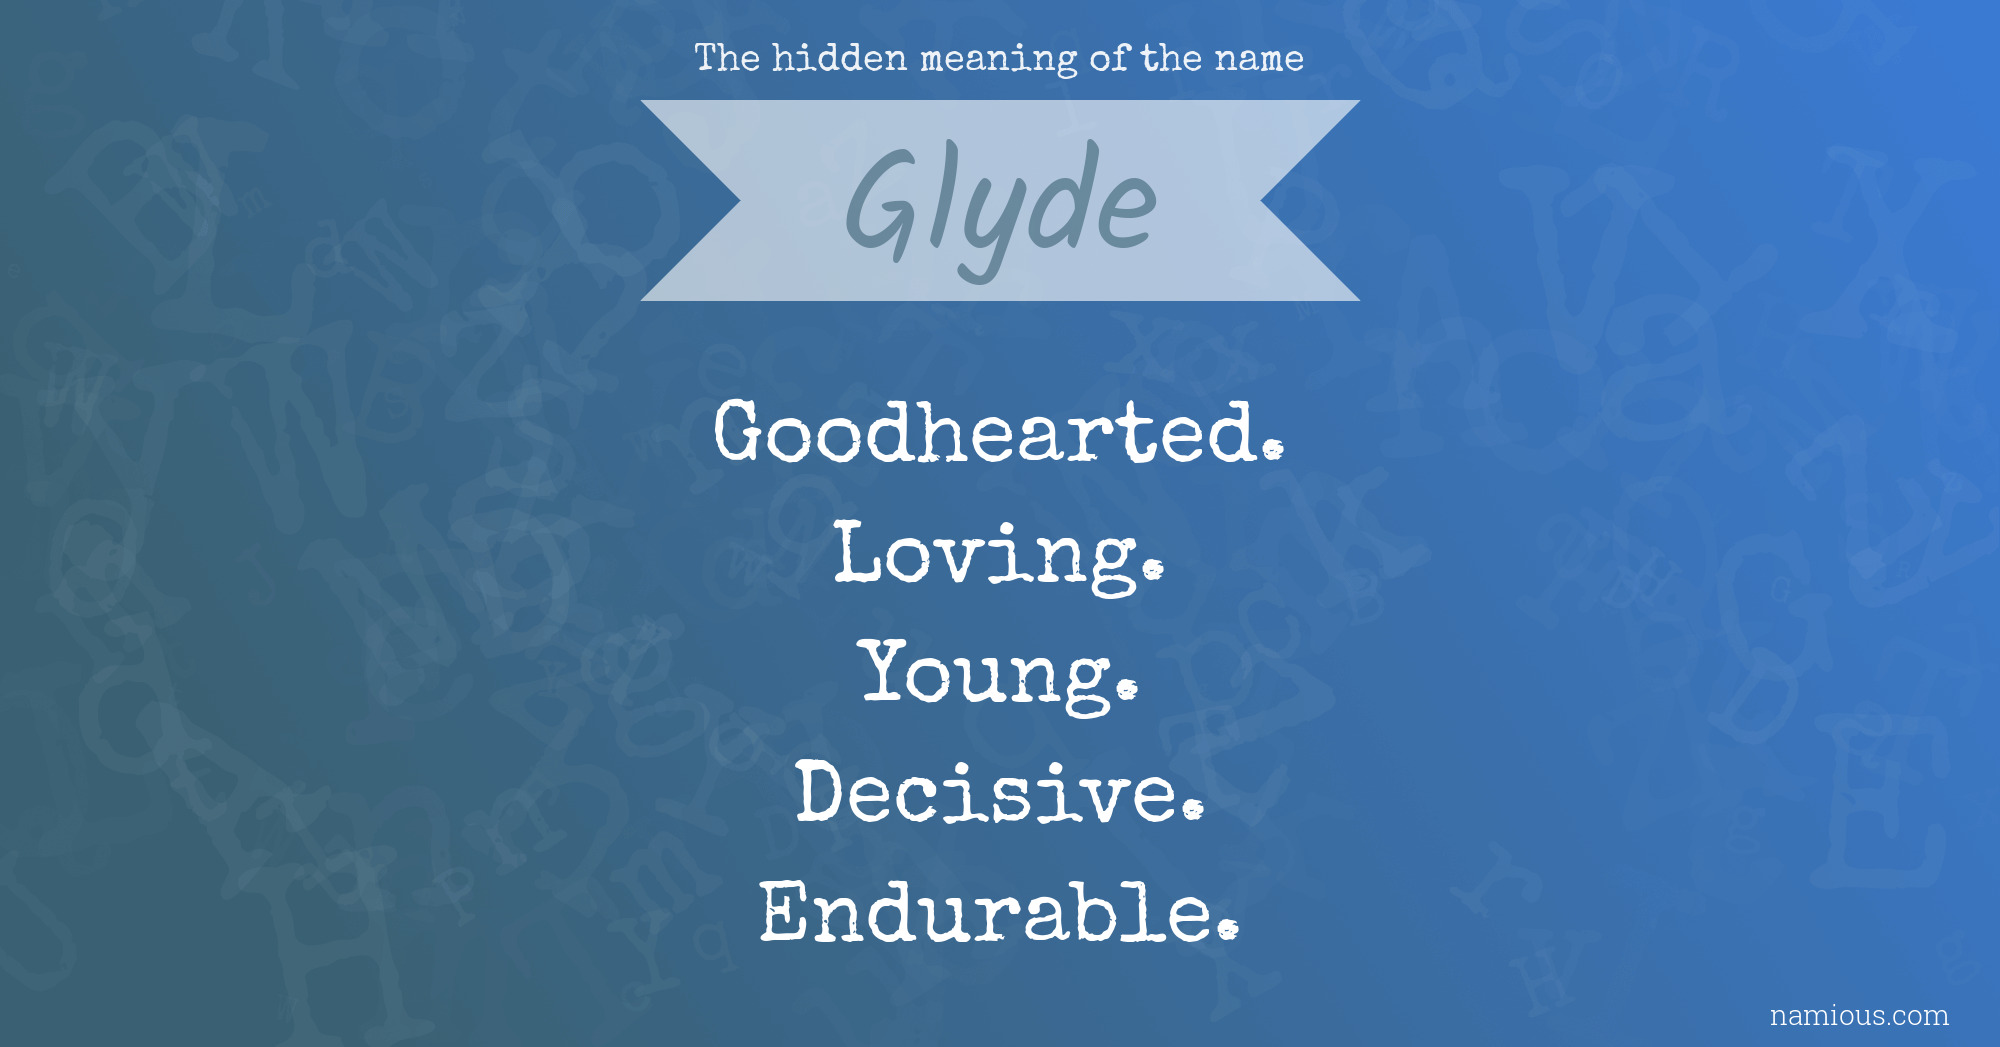 The hidden meaning of the name Glyde